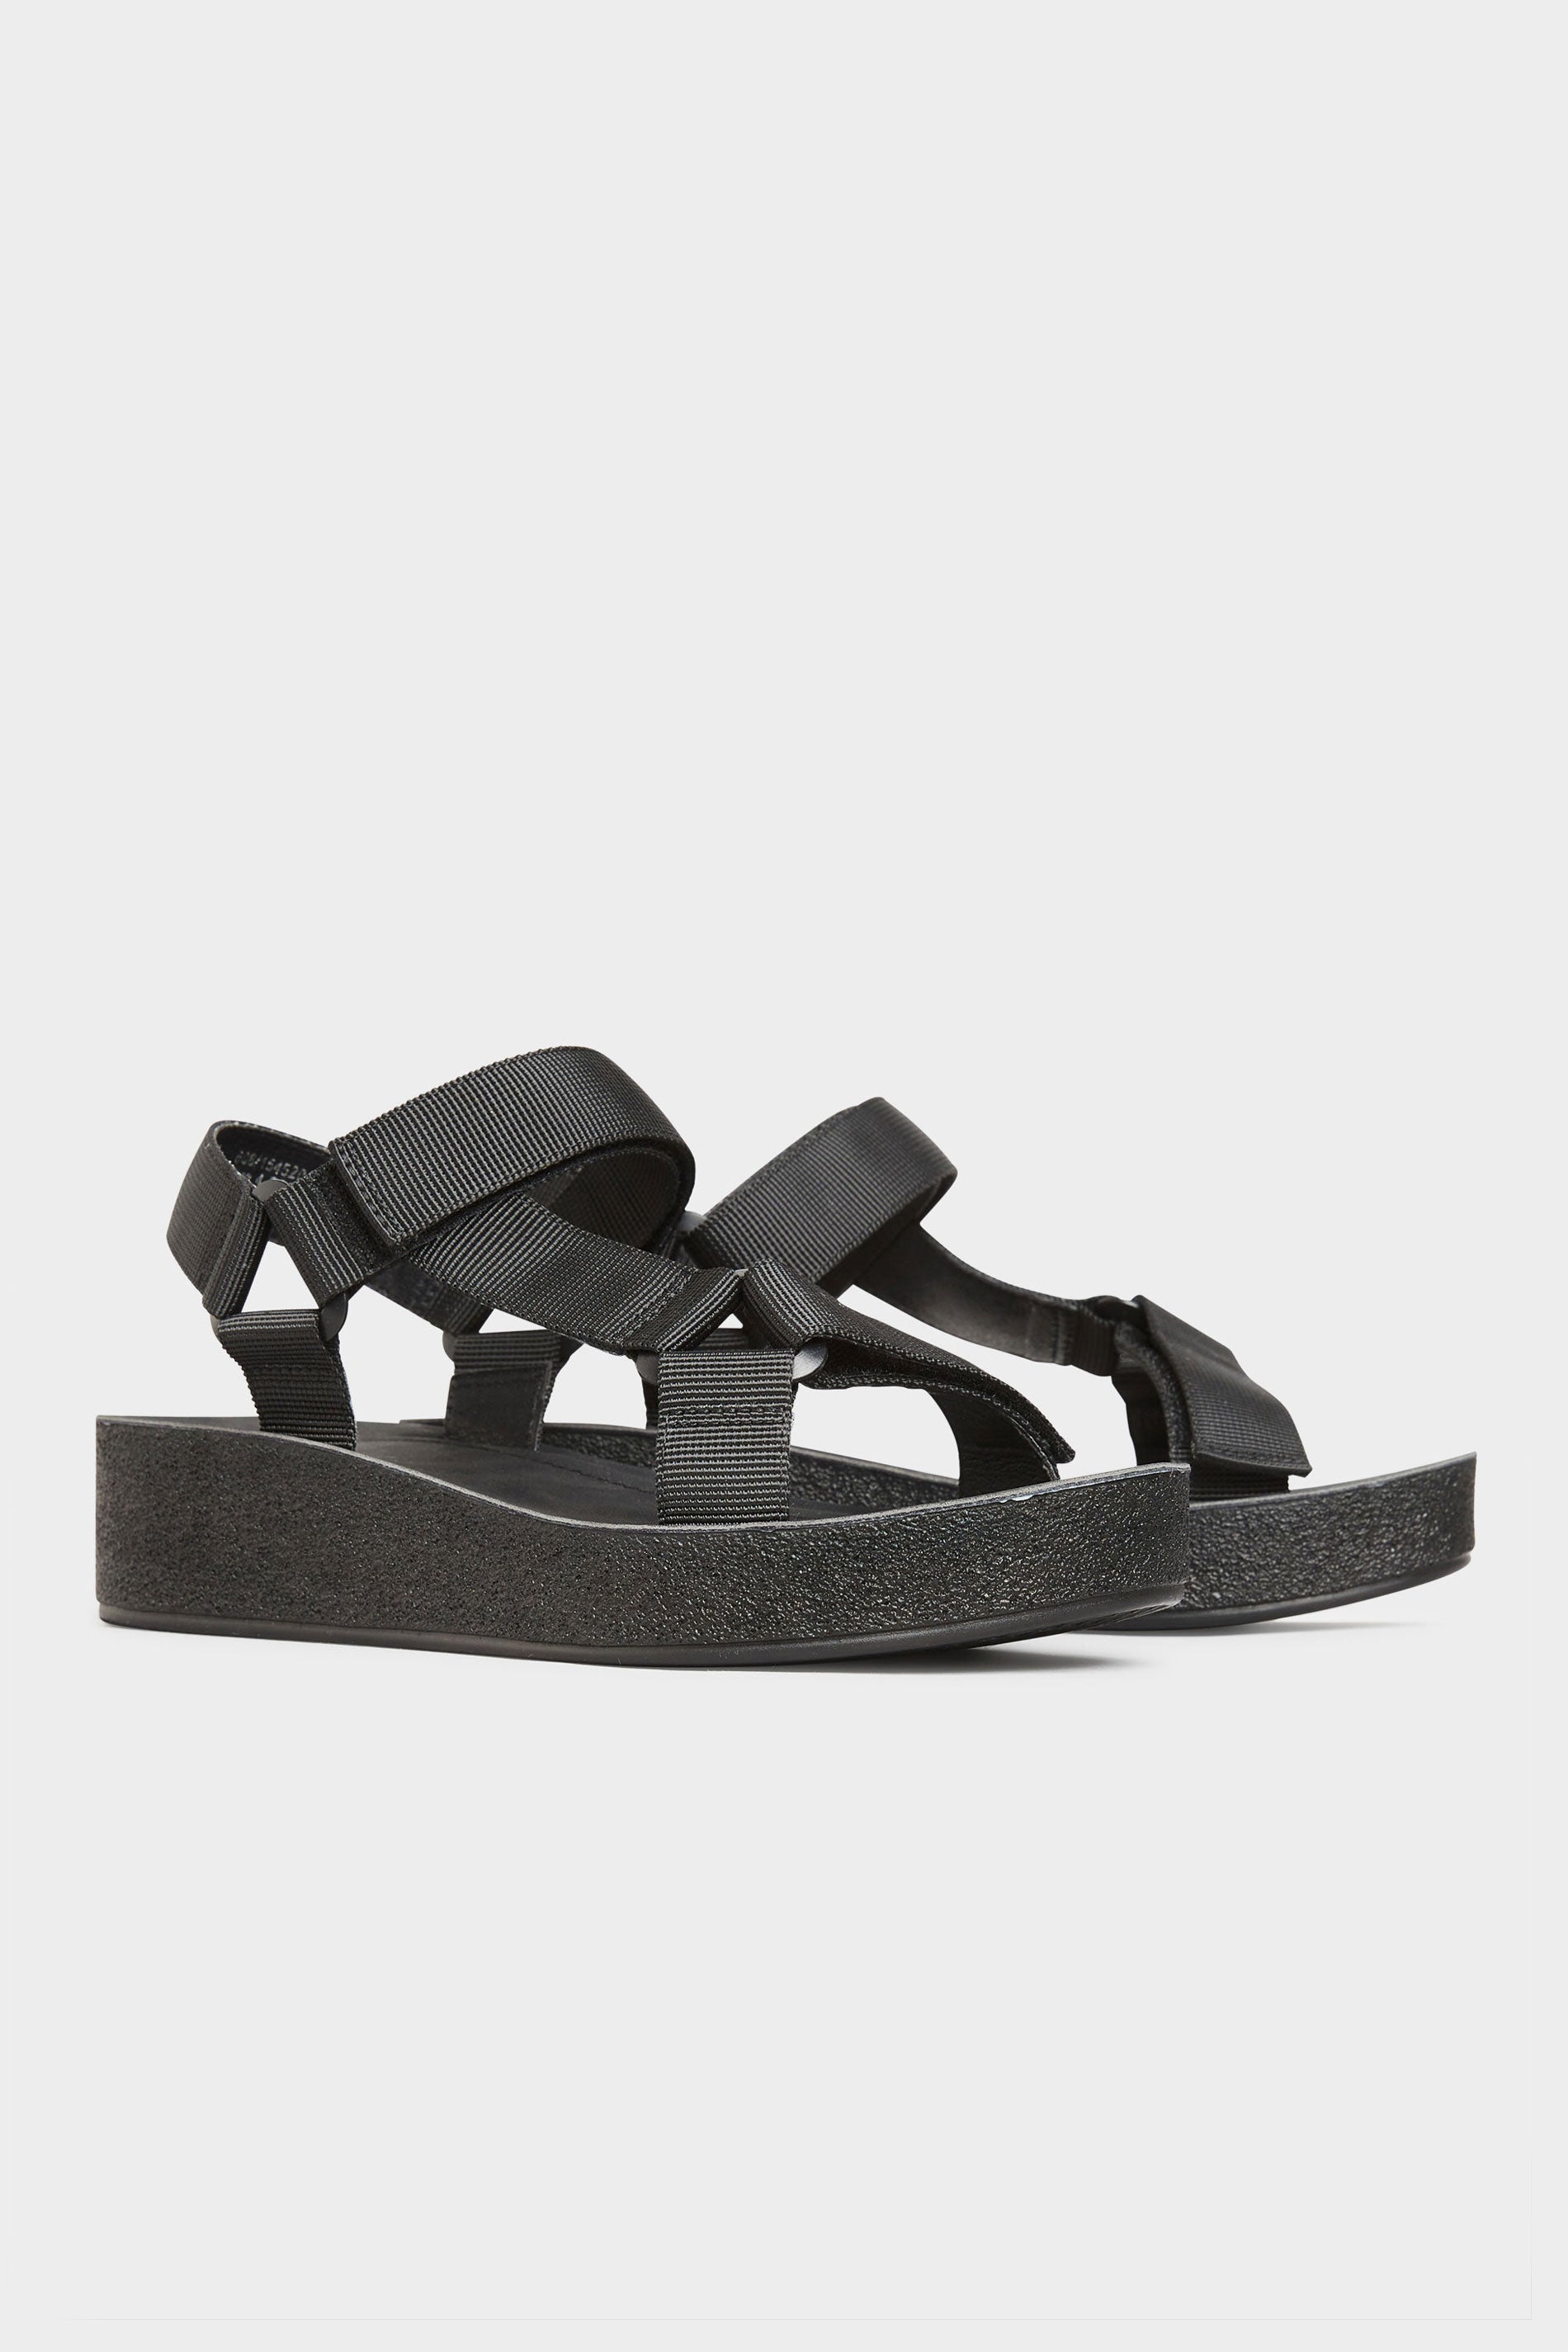 Yours Clothing + Black Sporty Mid Platform Sandals In Extra Wide EEE Fit